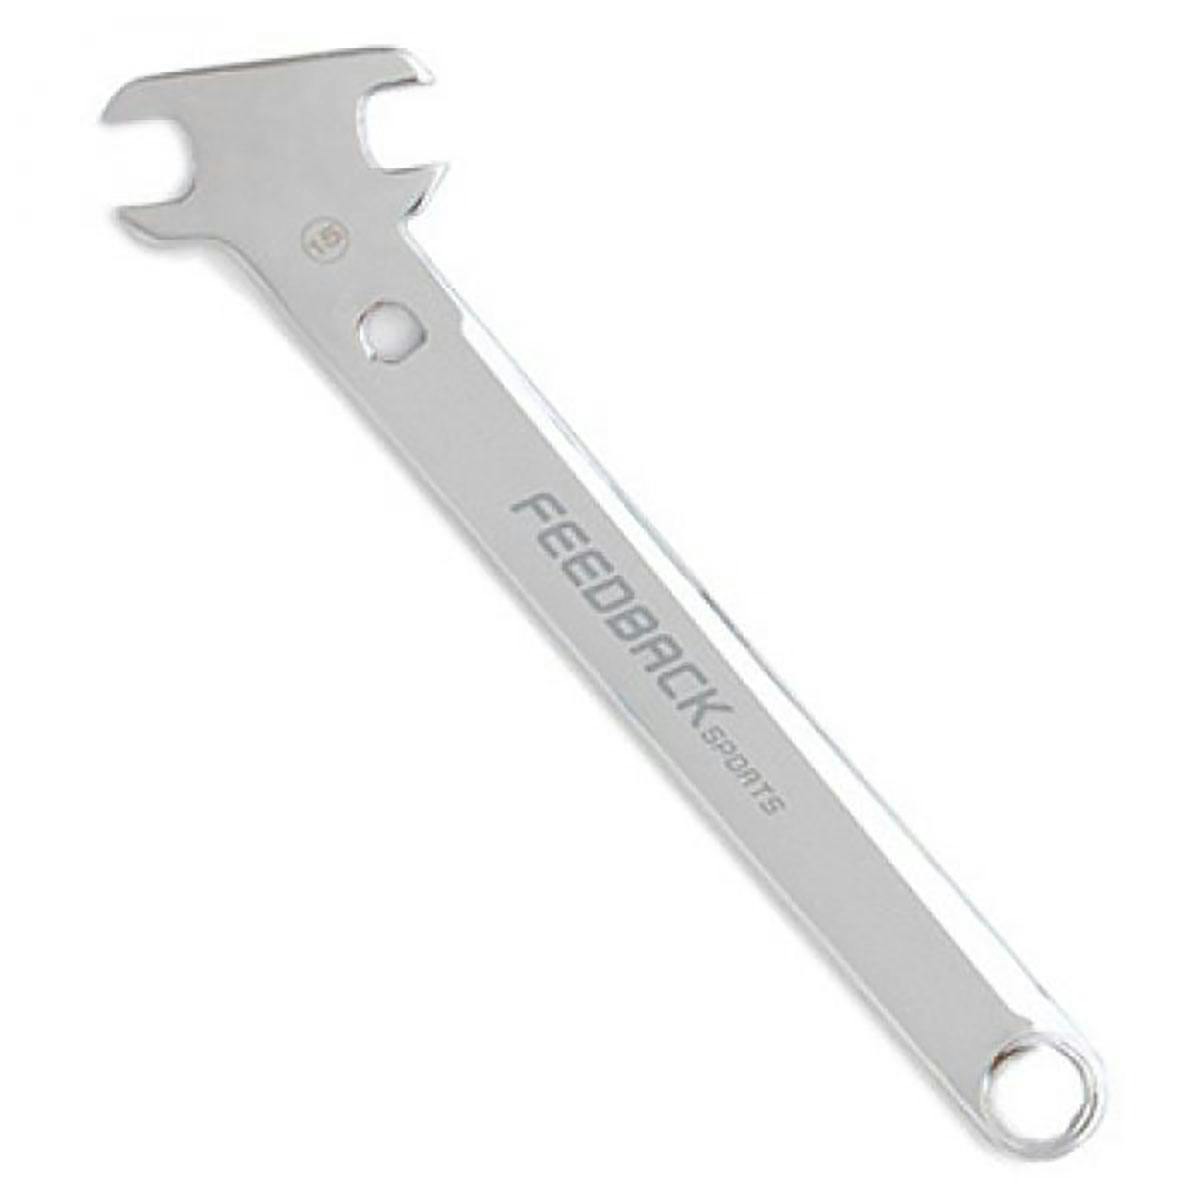 Feedback Sports Pedal Wrench - Silver - 15mm